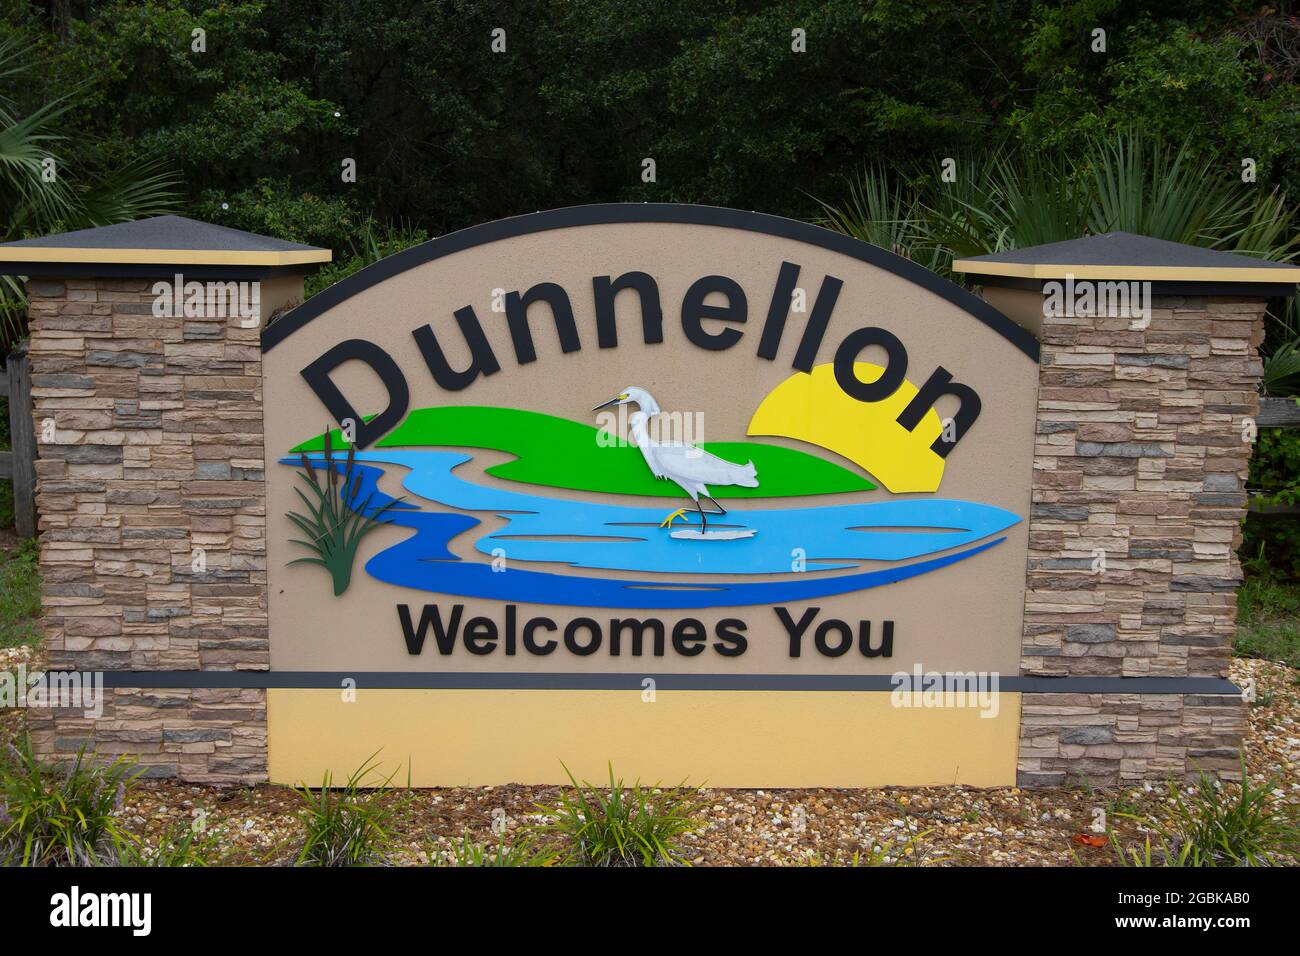 Welcome sign for the City of Dunnellon, Florida Stock Photo